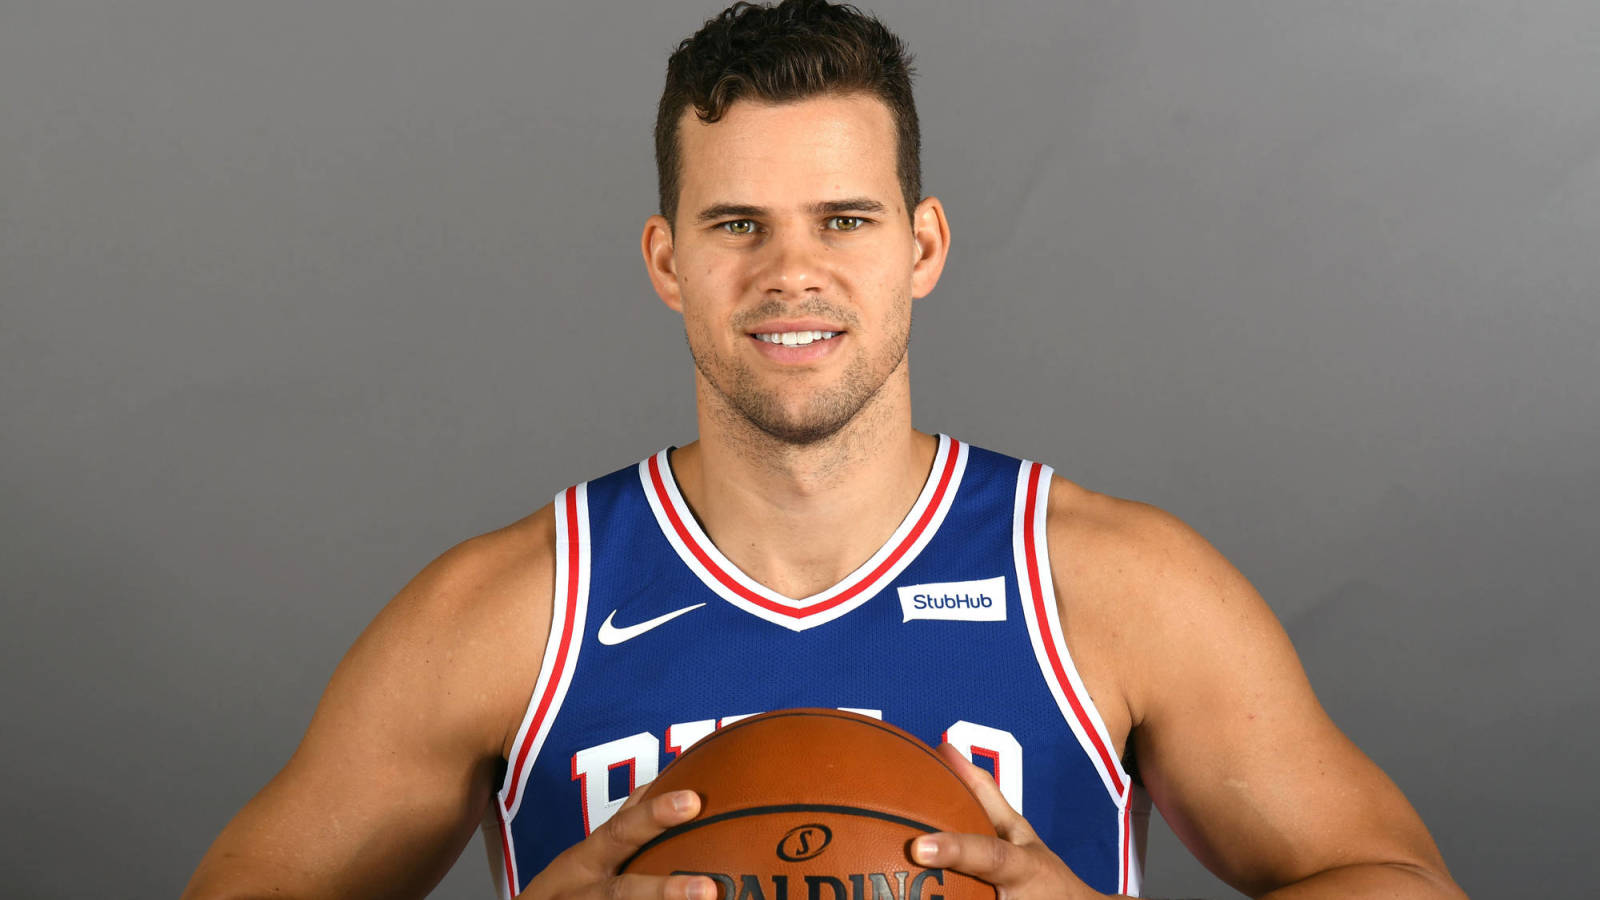 Celtics' Kris Humphries ready when his name is called